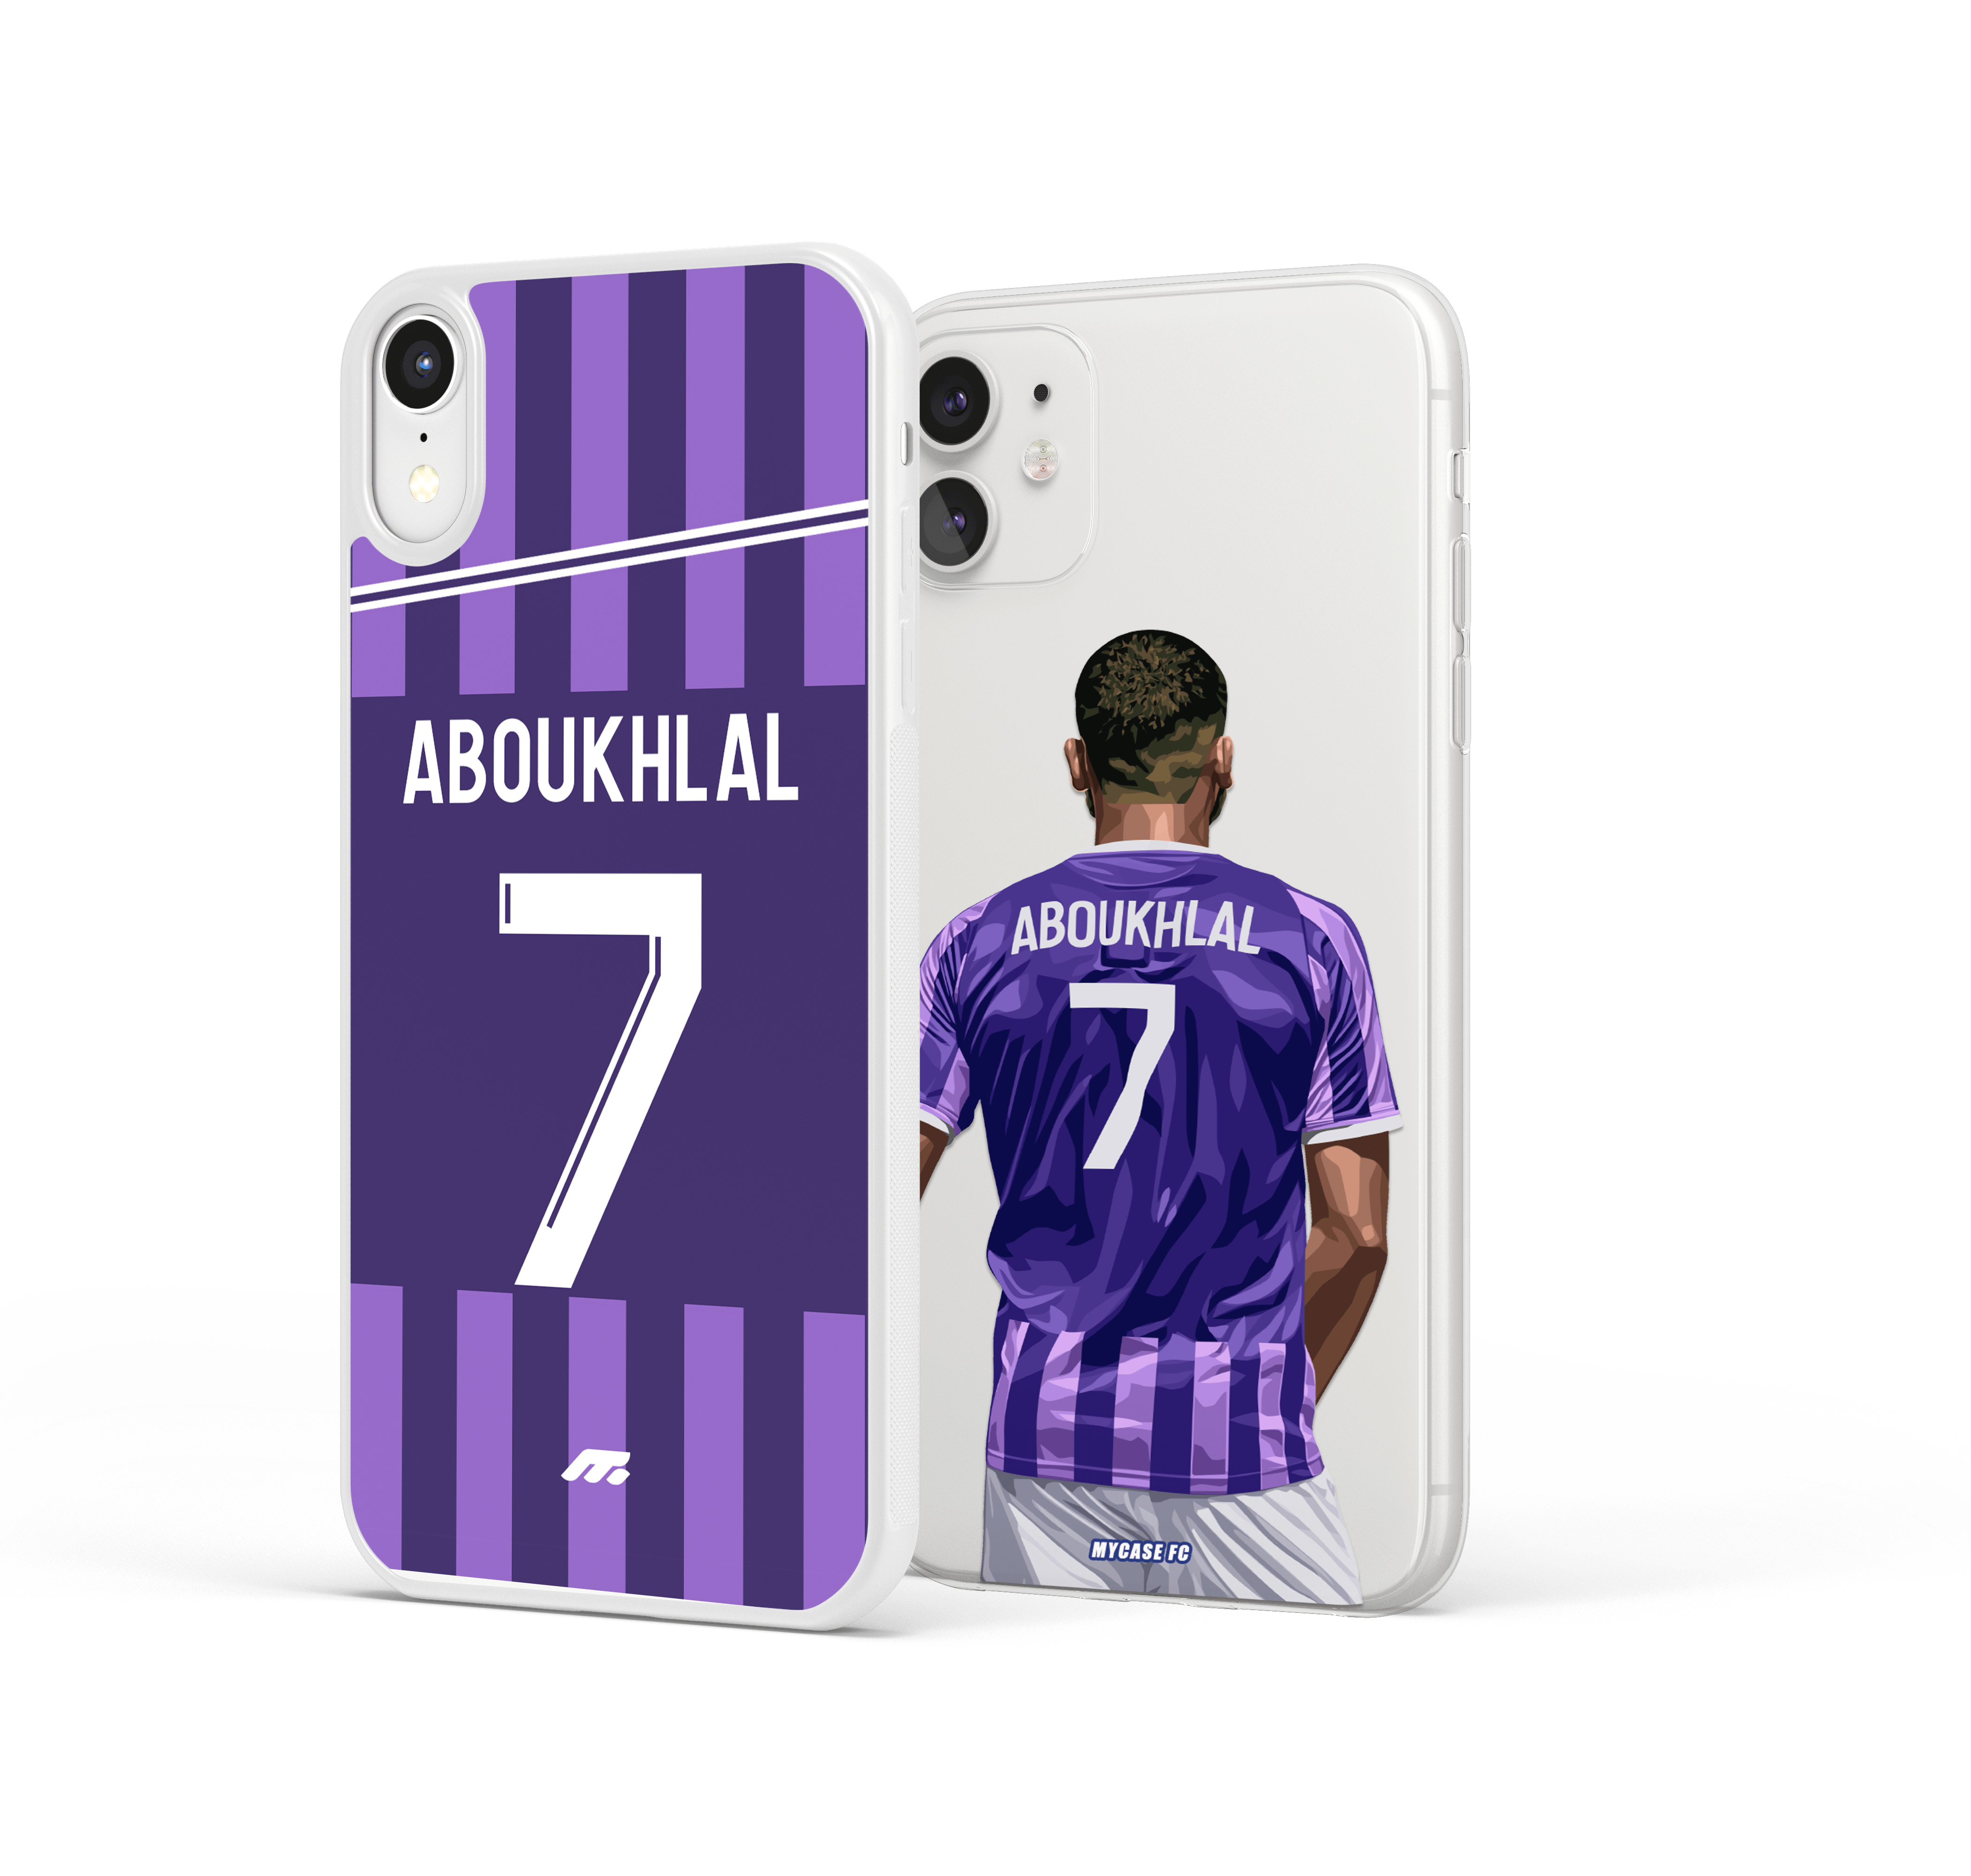 ABOUKHLAL PACK